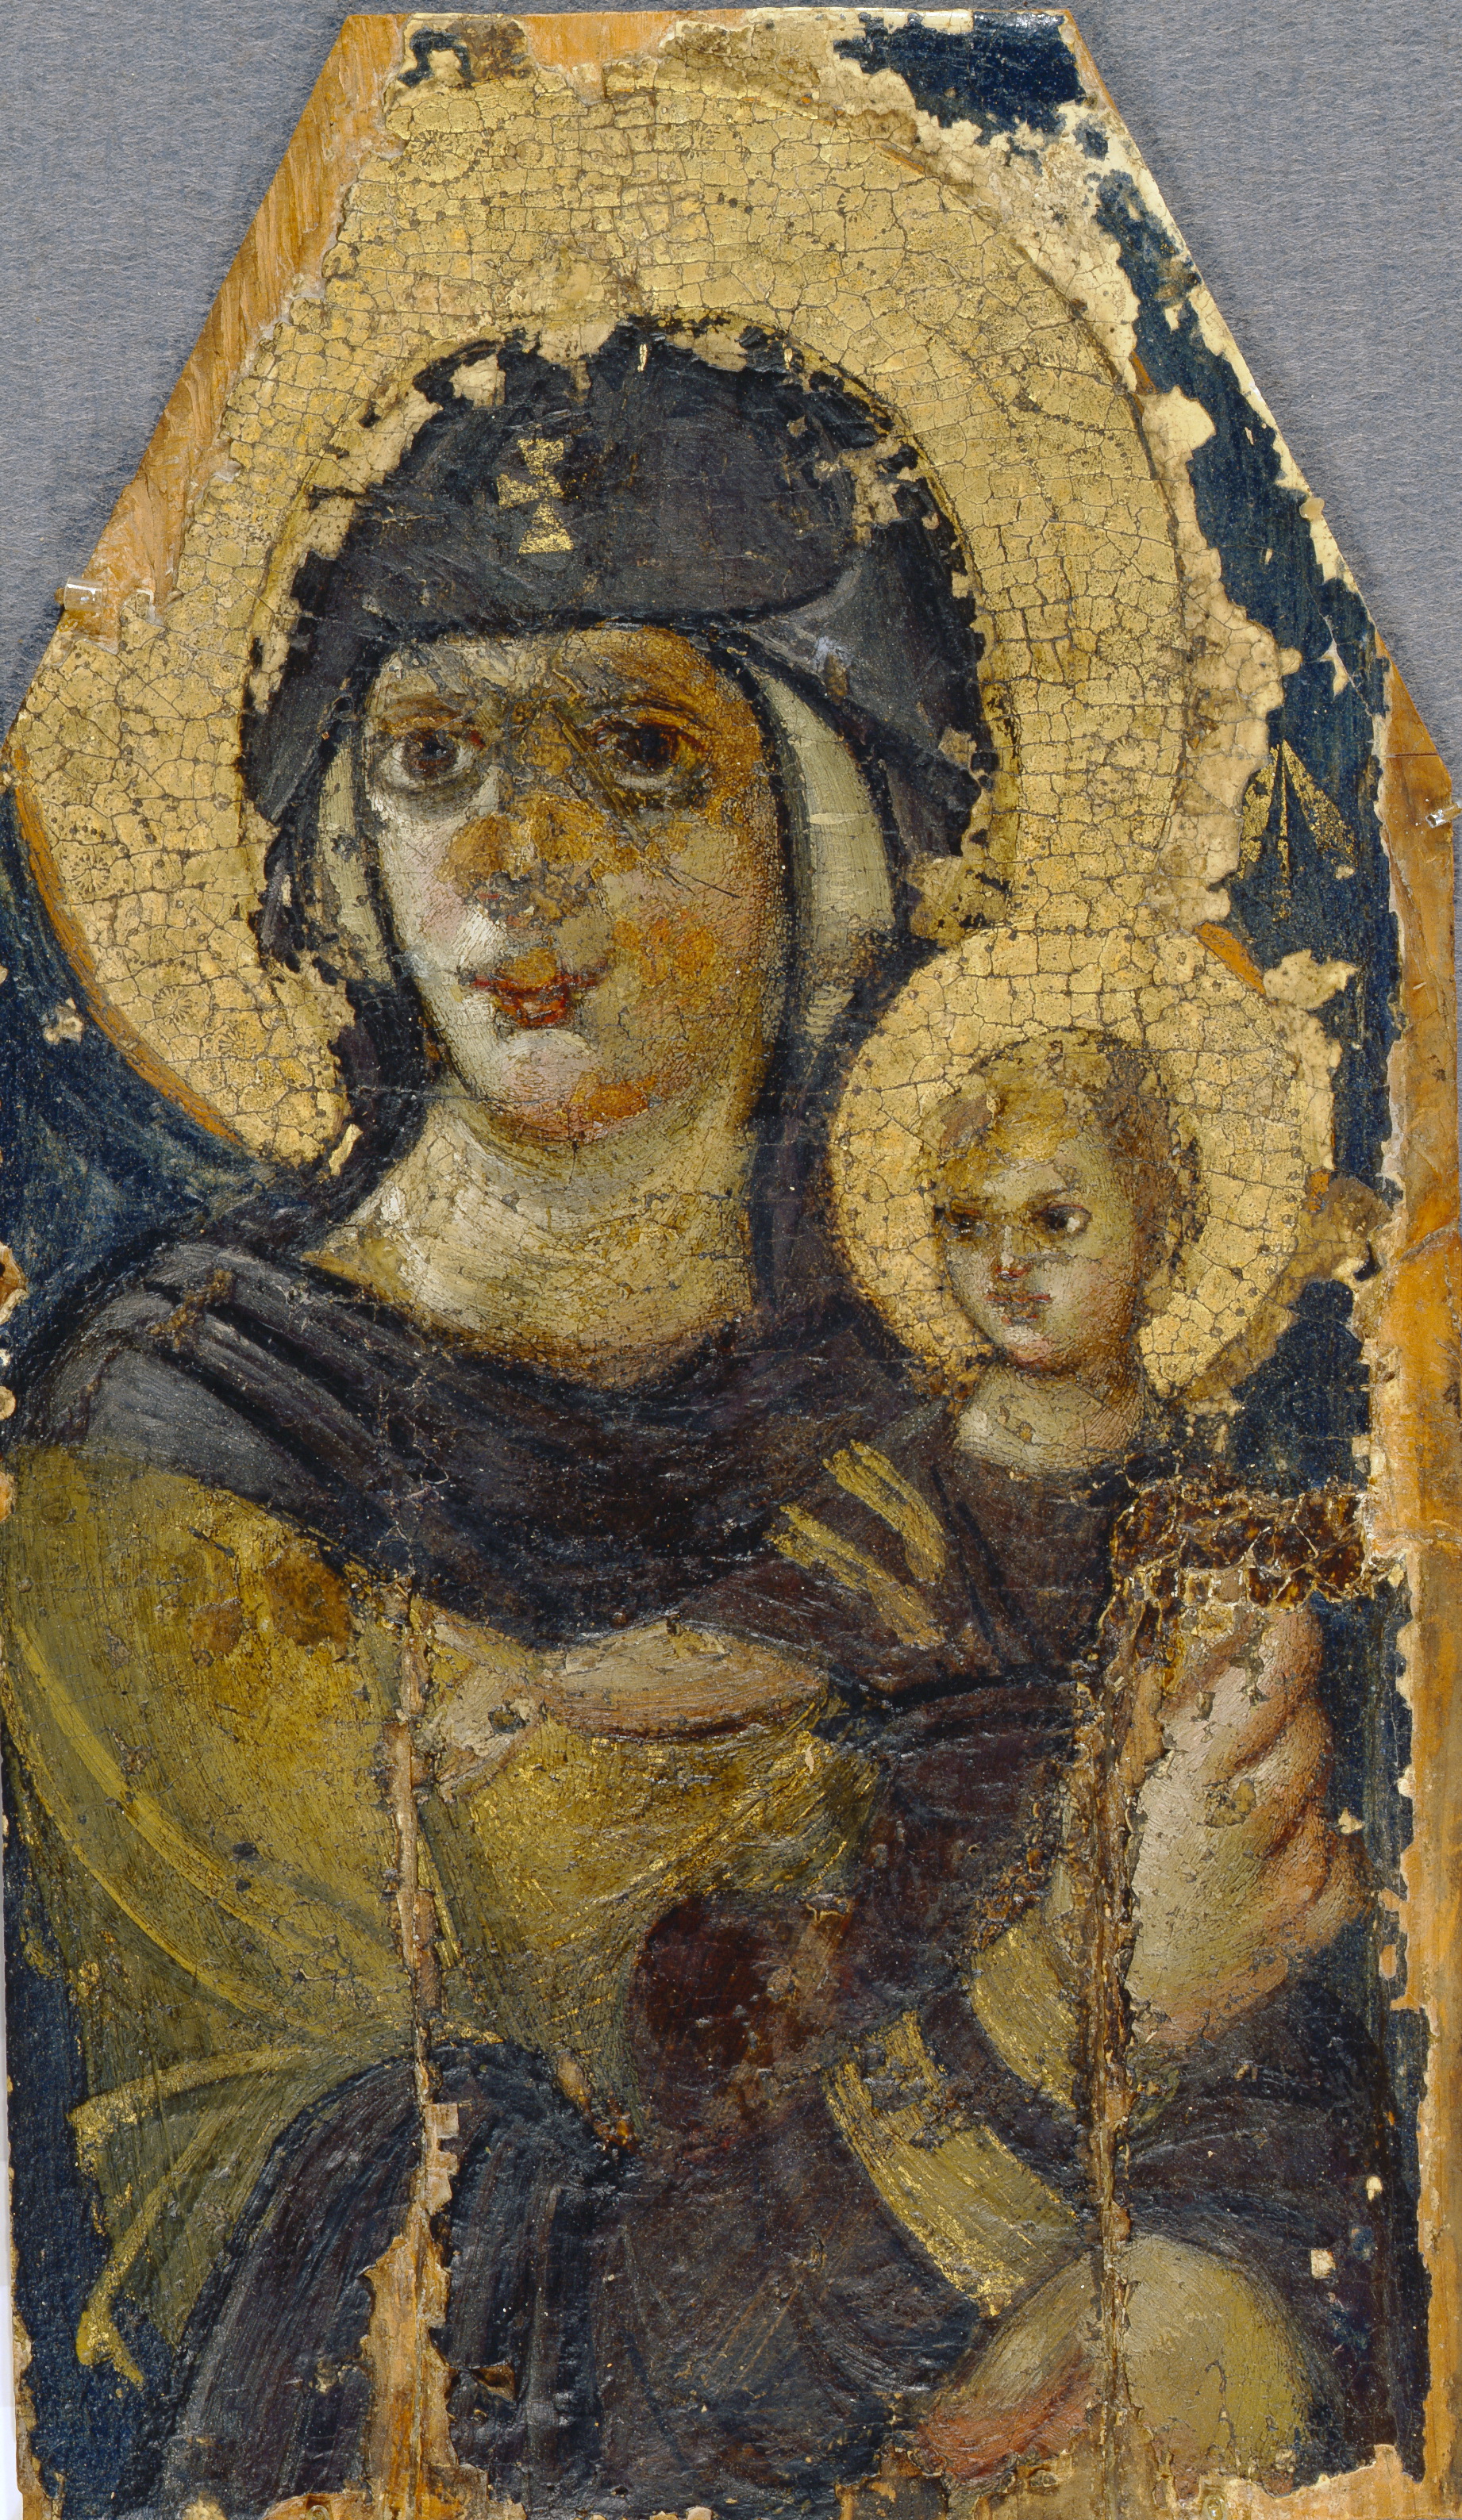 Icon “Godmother with the Child”. Byzantium, 6th century. From the Porfyri Uspensky / “Museum town” collection.